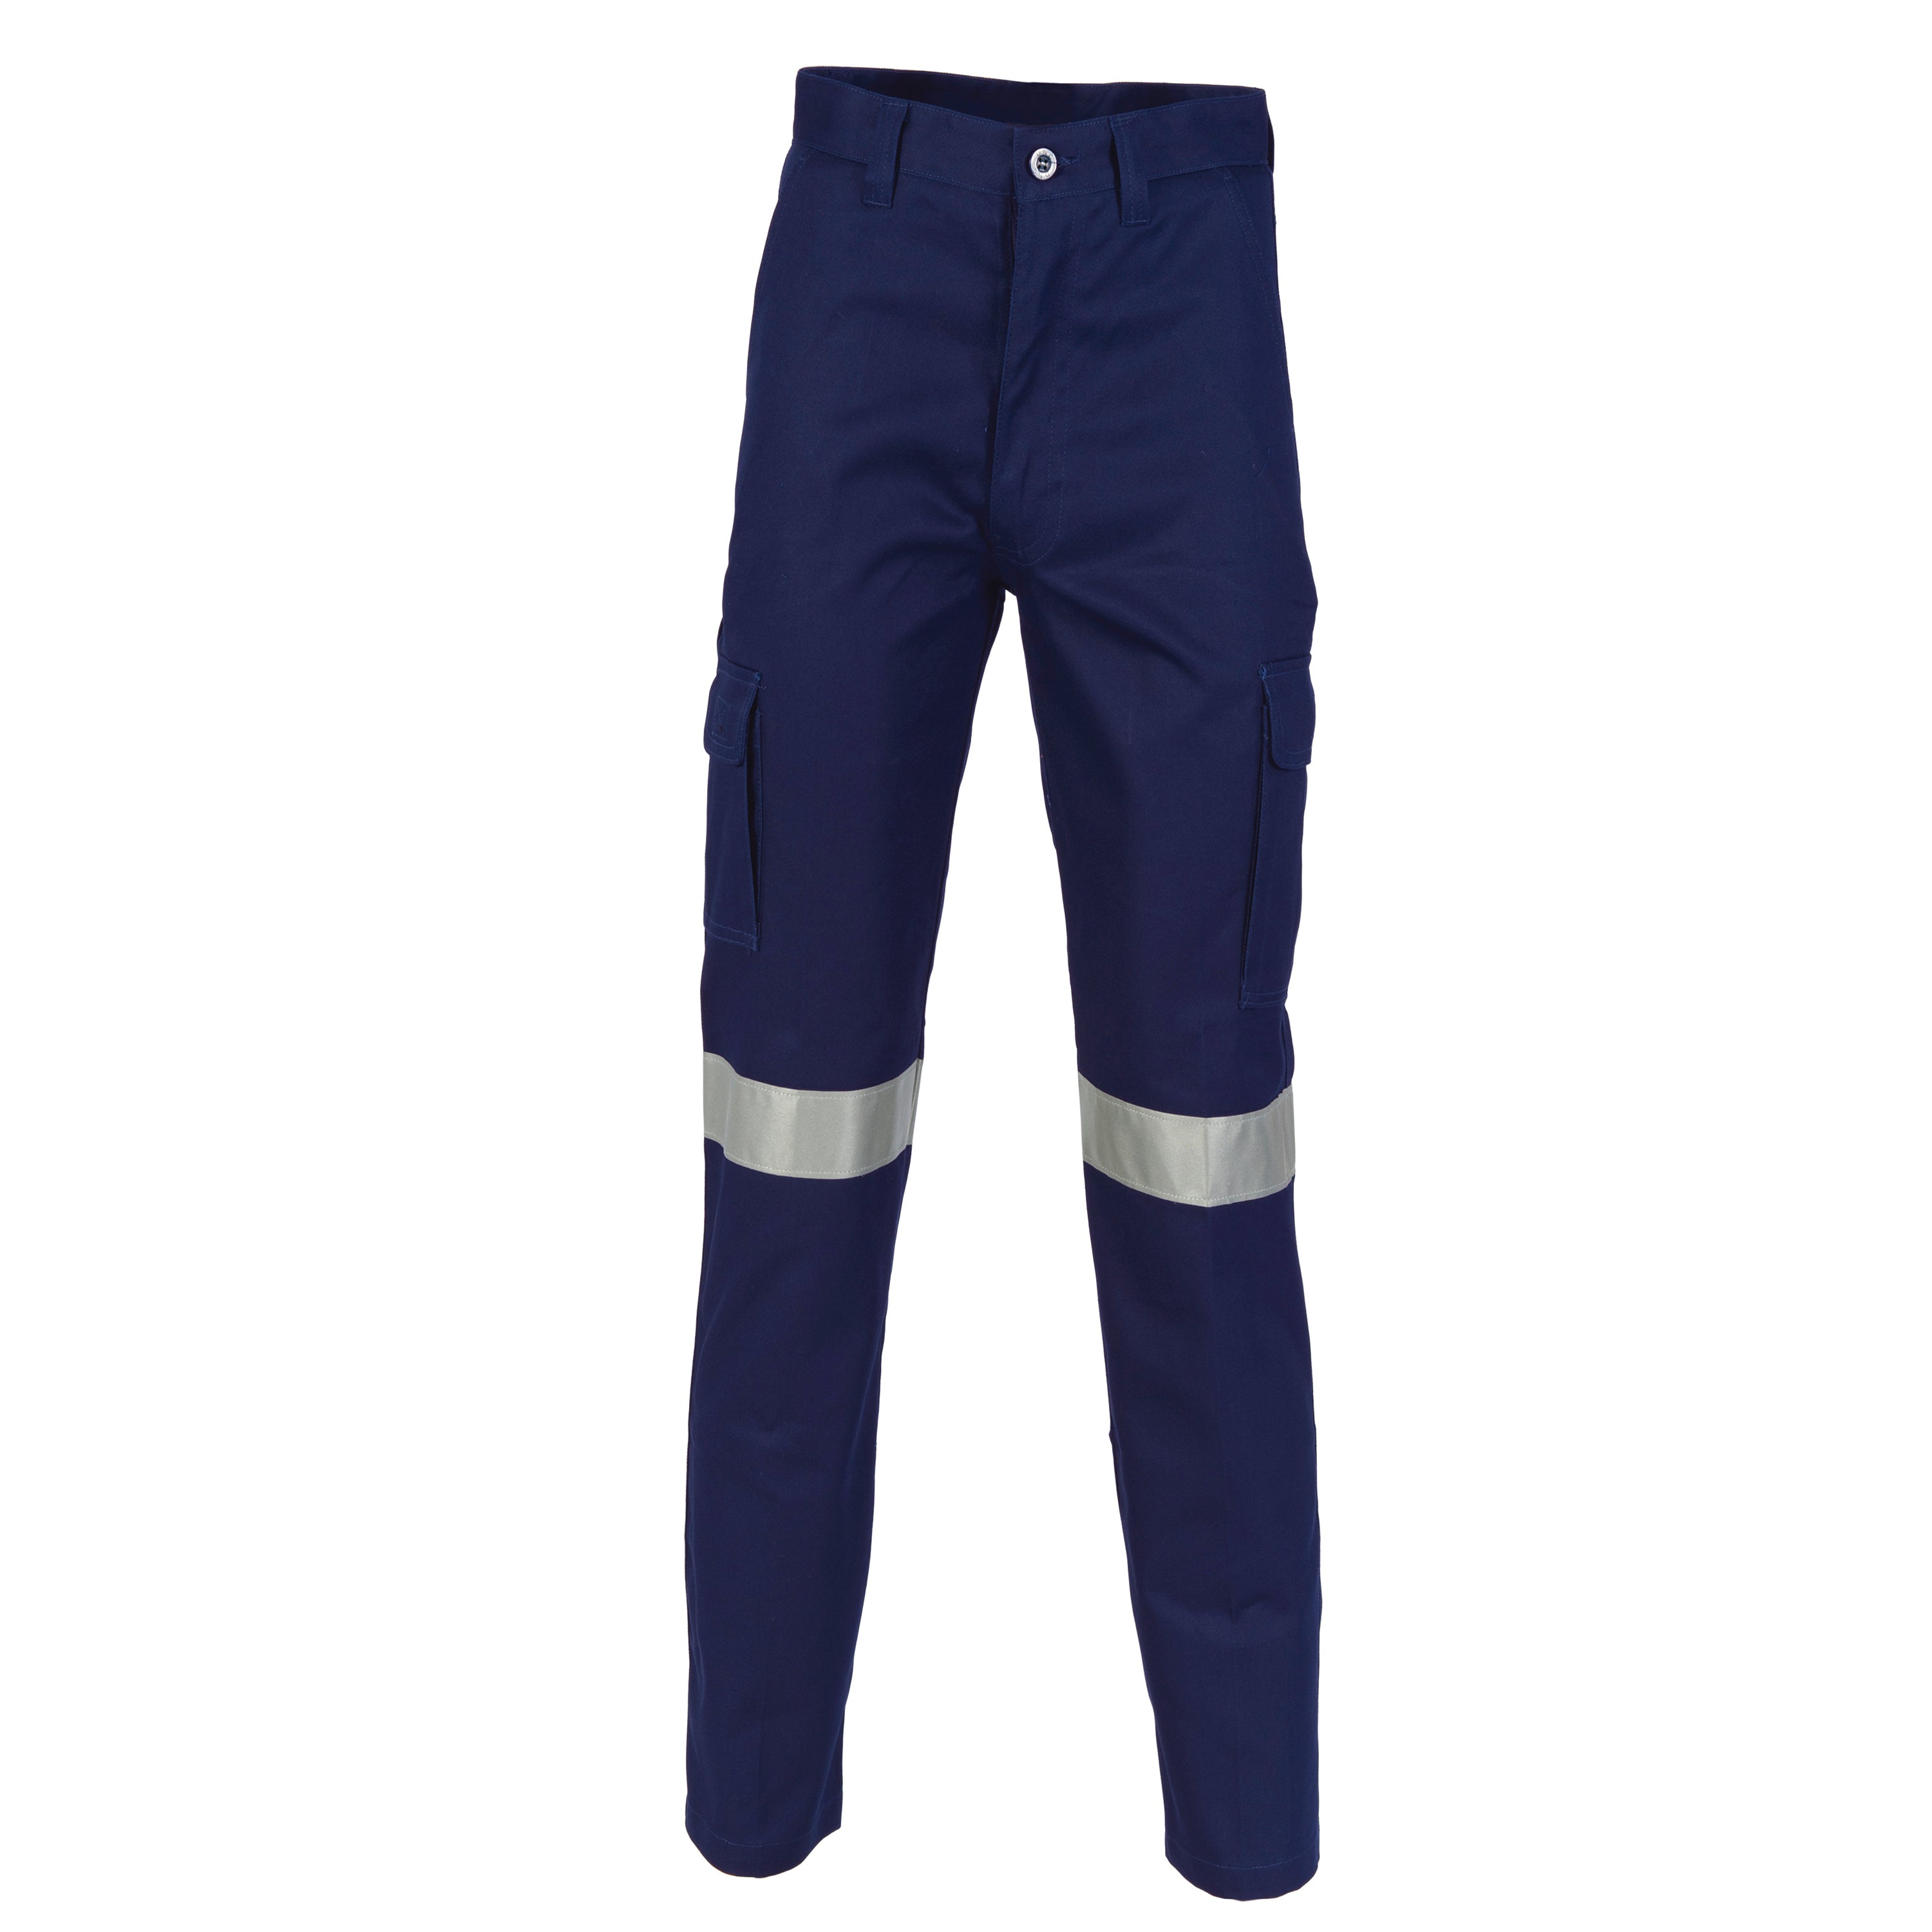 DNC - 3319 Cotton Drill Cargo Pants With 3M Reflective Tape